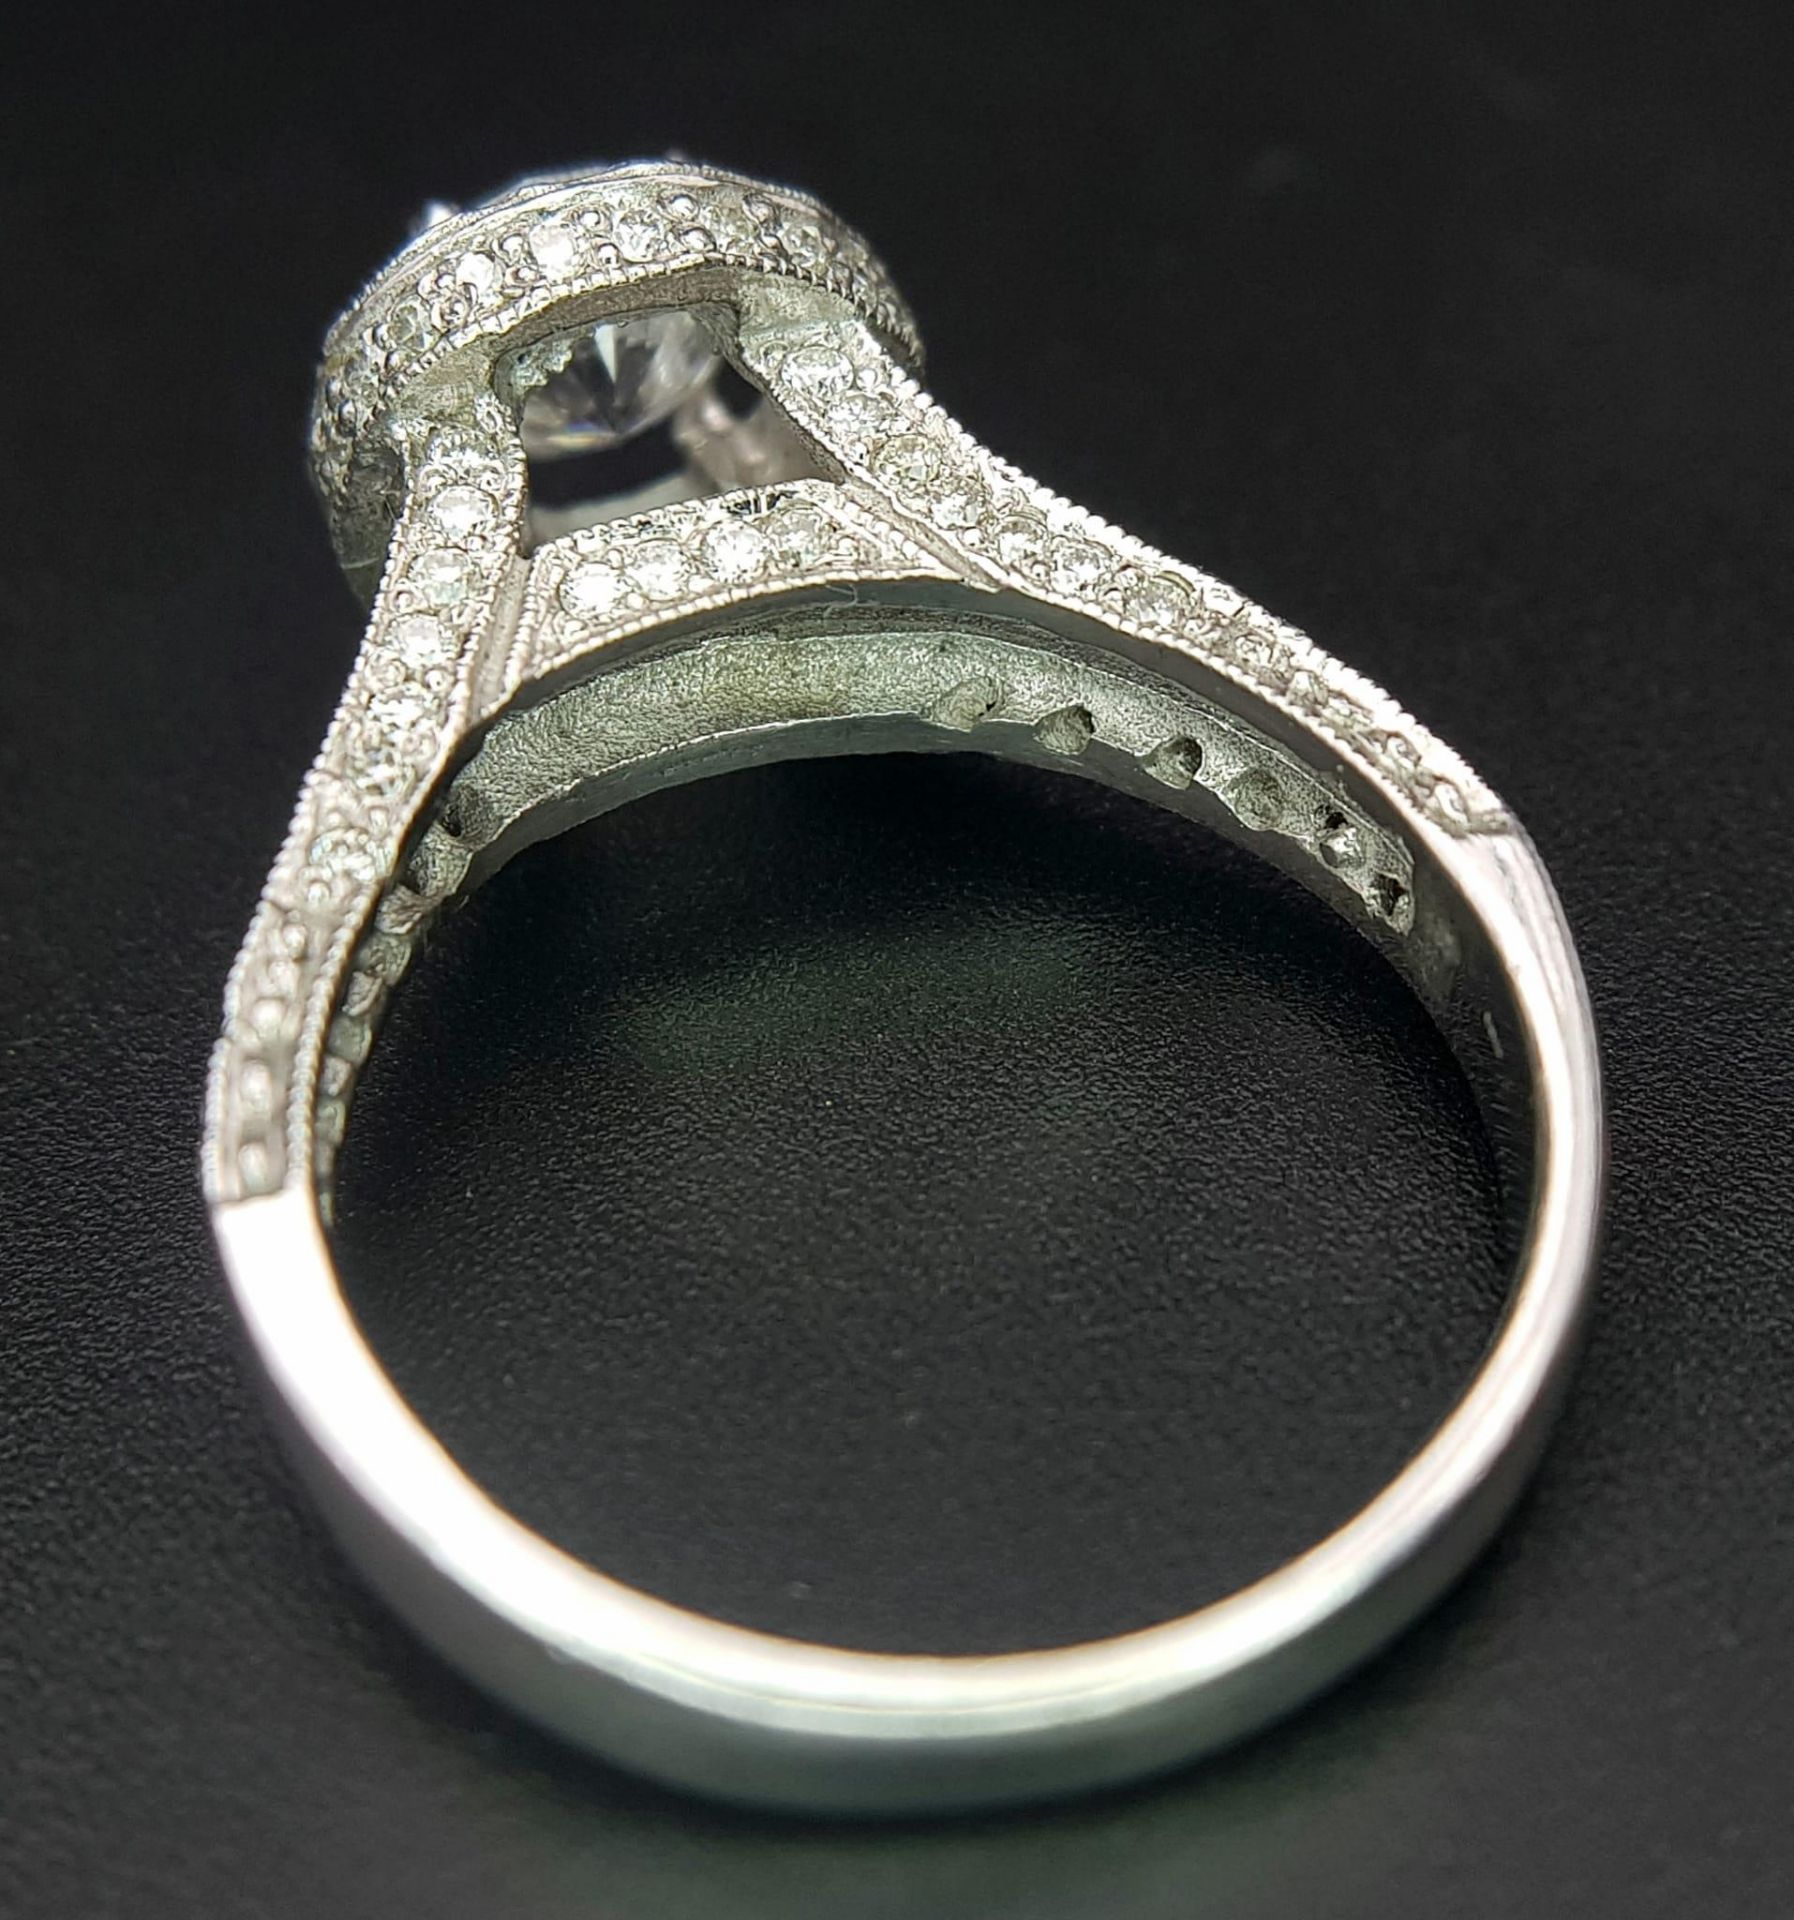 An 18 K white gold ring with a brilliant cut diamond (1.01 carats) surrounded by diamonds on the top - Image 12 of 22